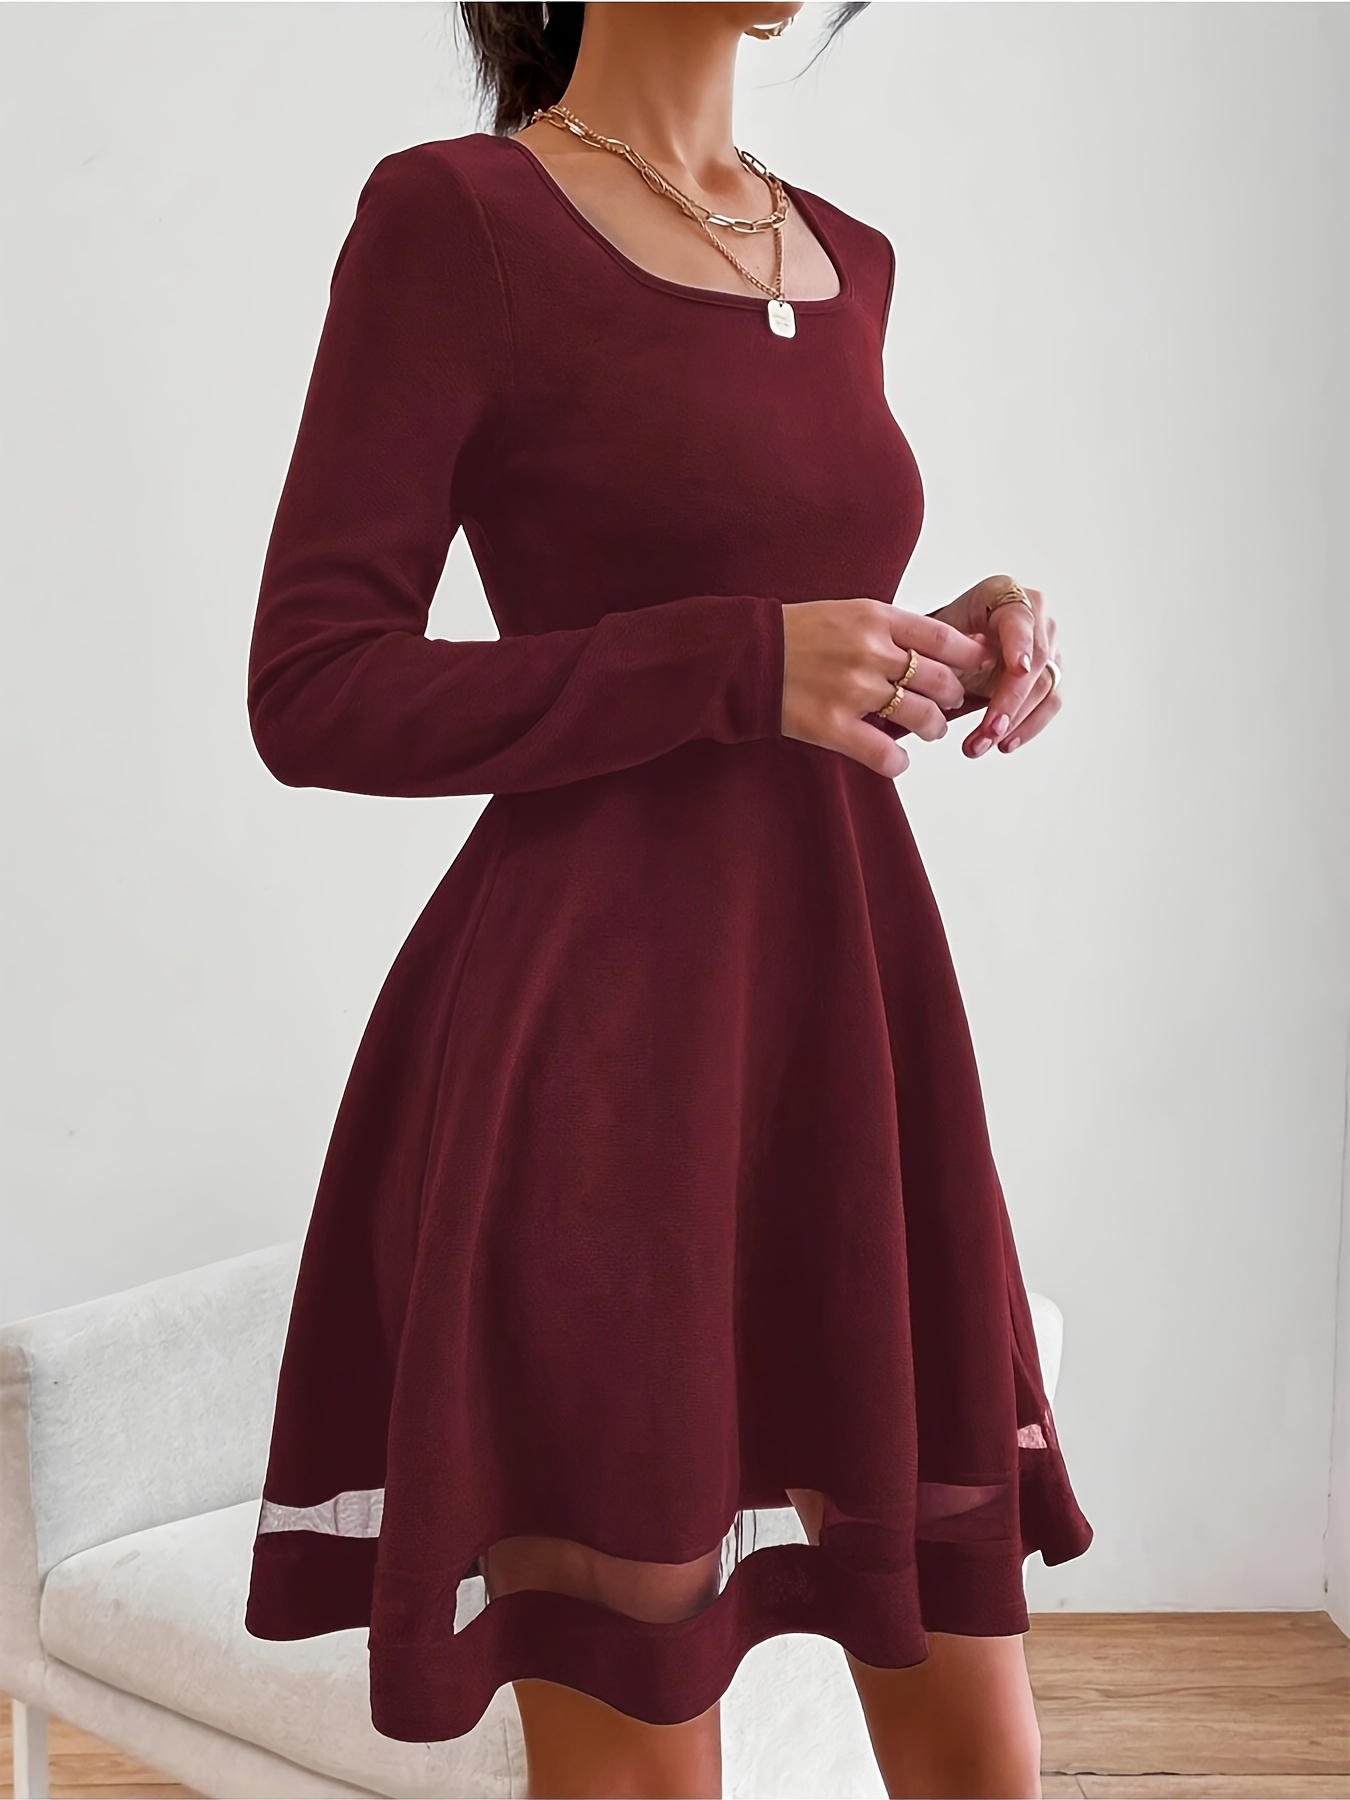 Contrast Lace Sweetheart Neck Dress Elegant Solid Midi Party